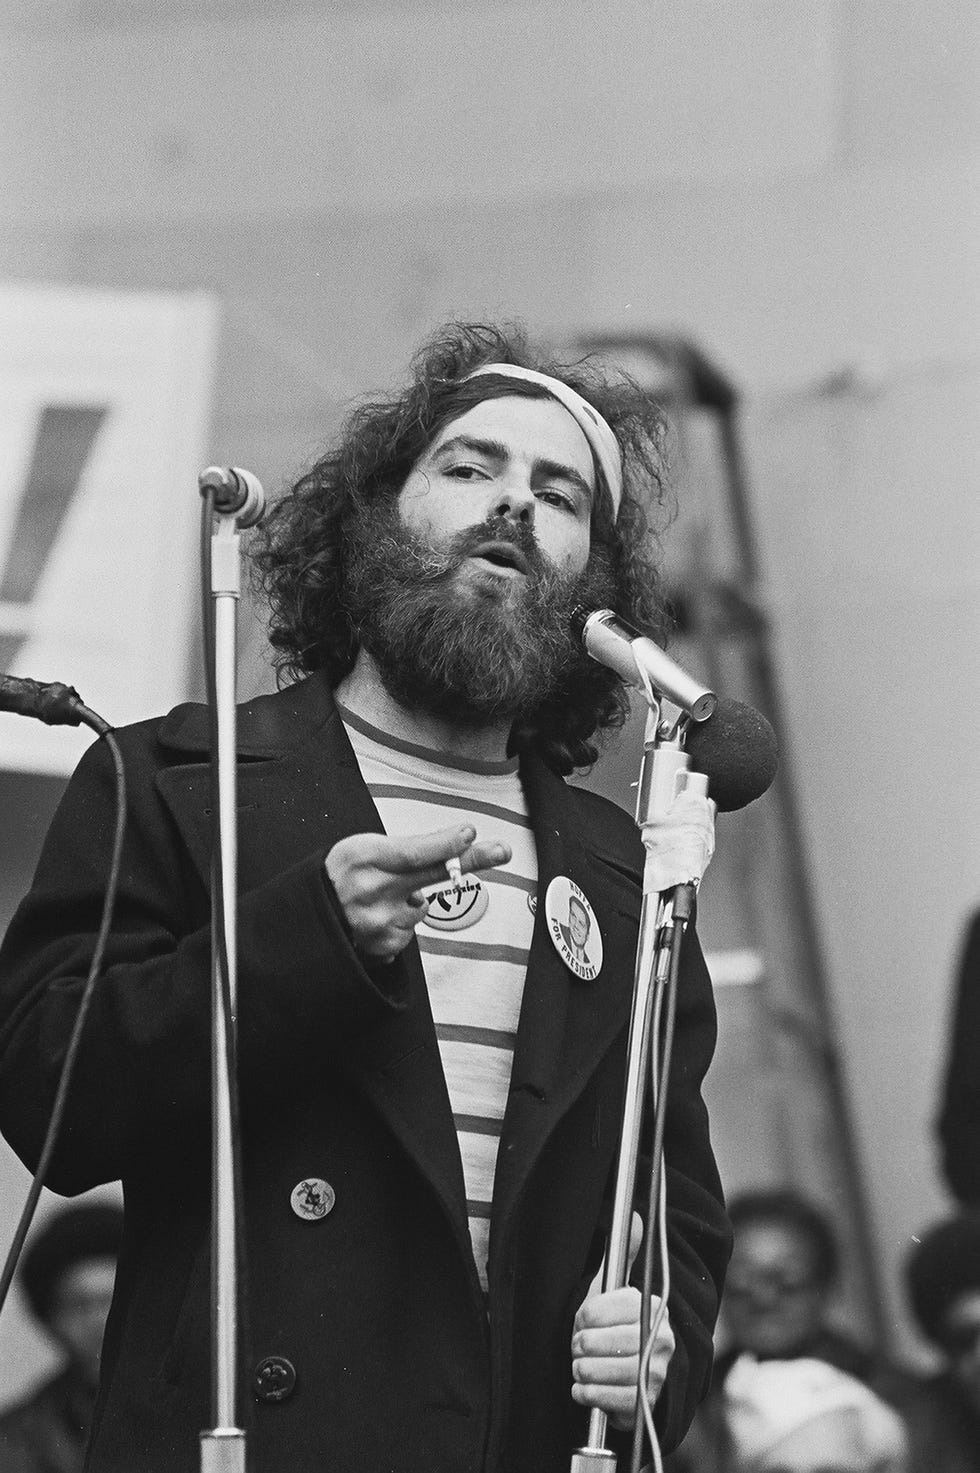 american social and political activist jerry rubin 1938   1994 speaks at an unspecified protest, circa 1970s he wears a button that reads 'hoffa for president' photo by david fentongetty images